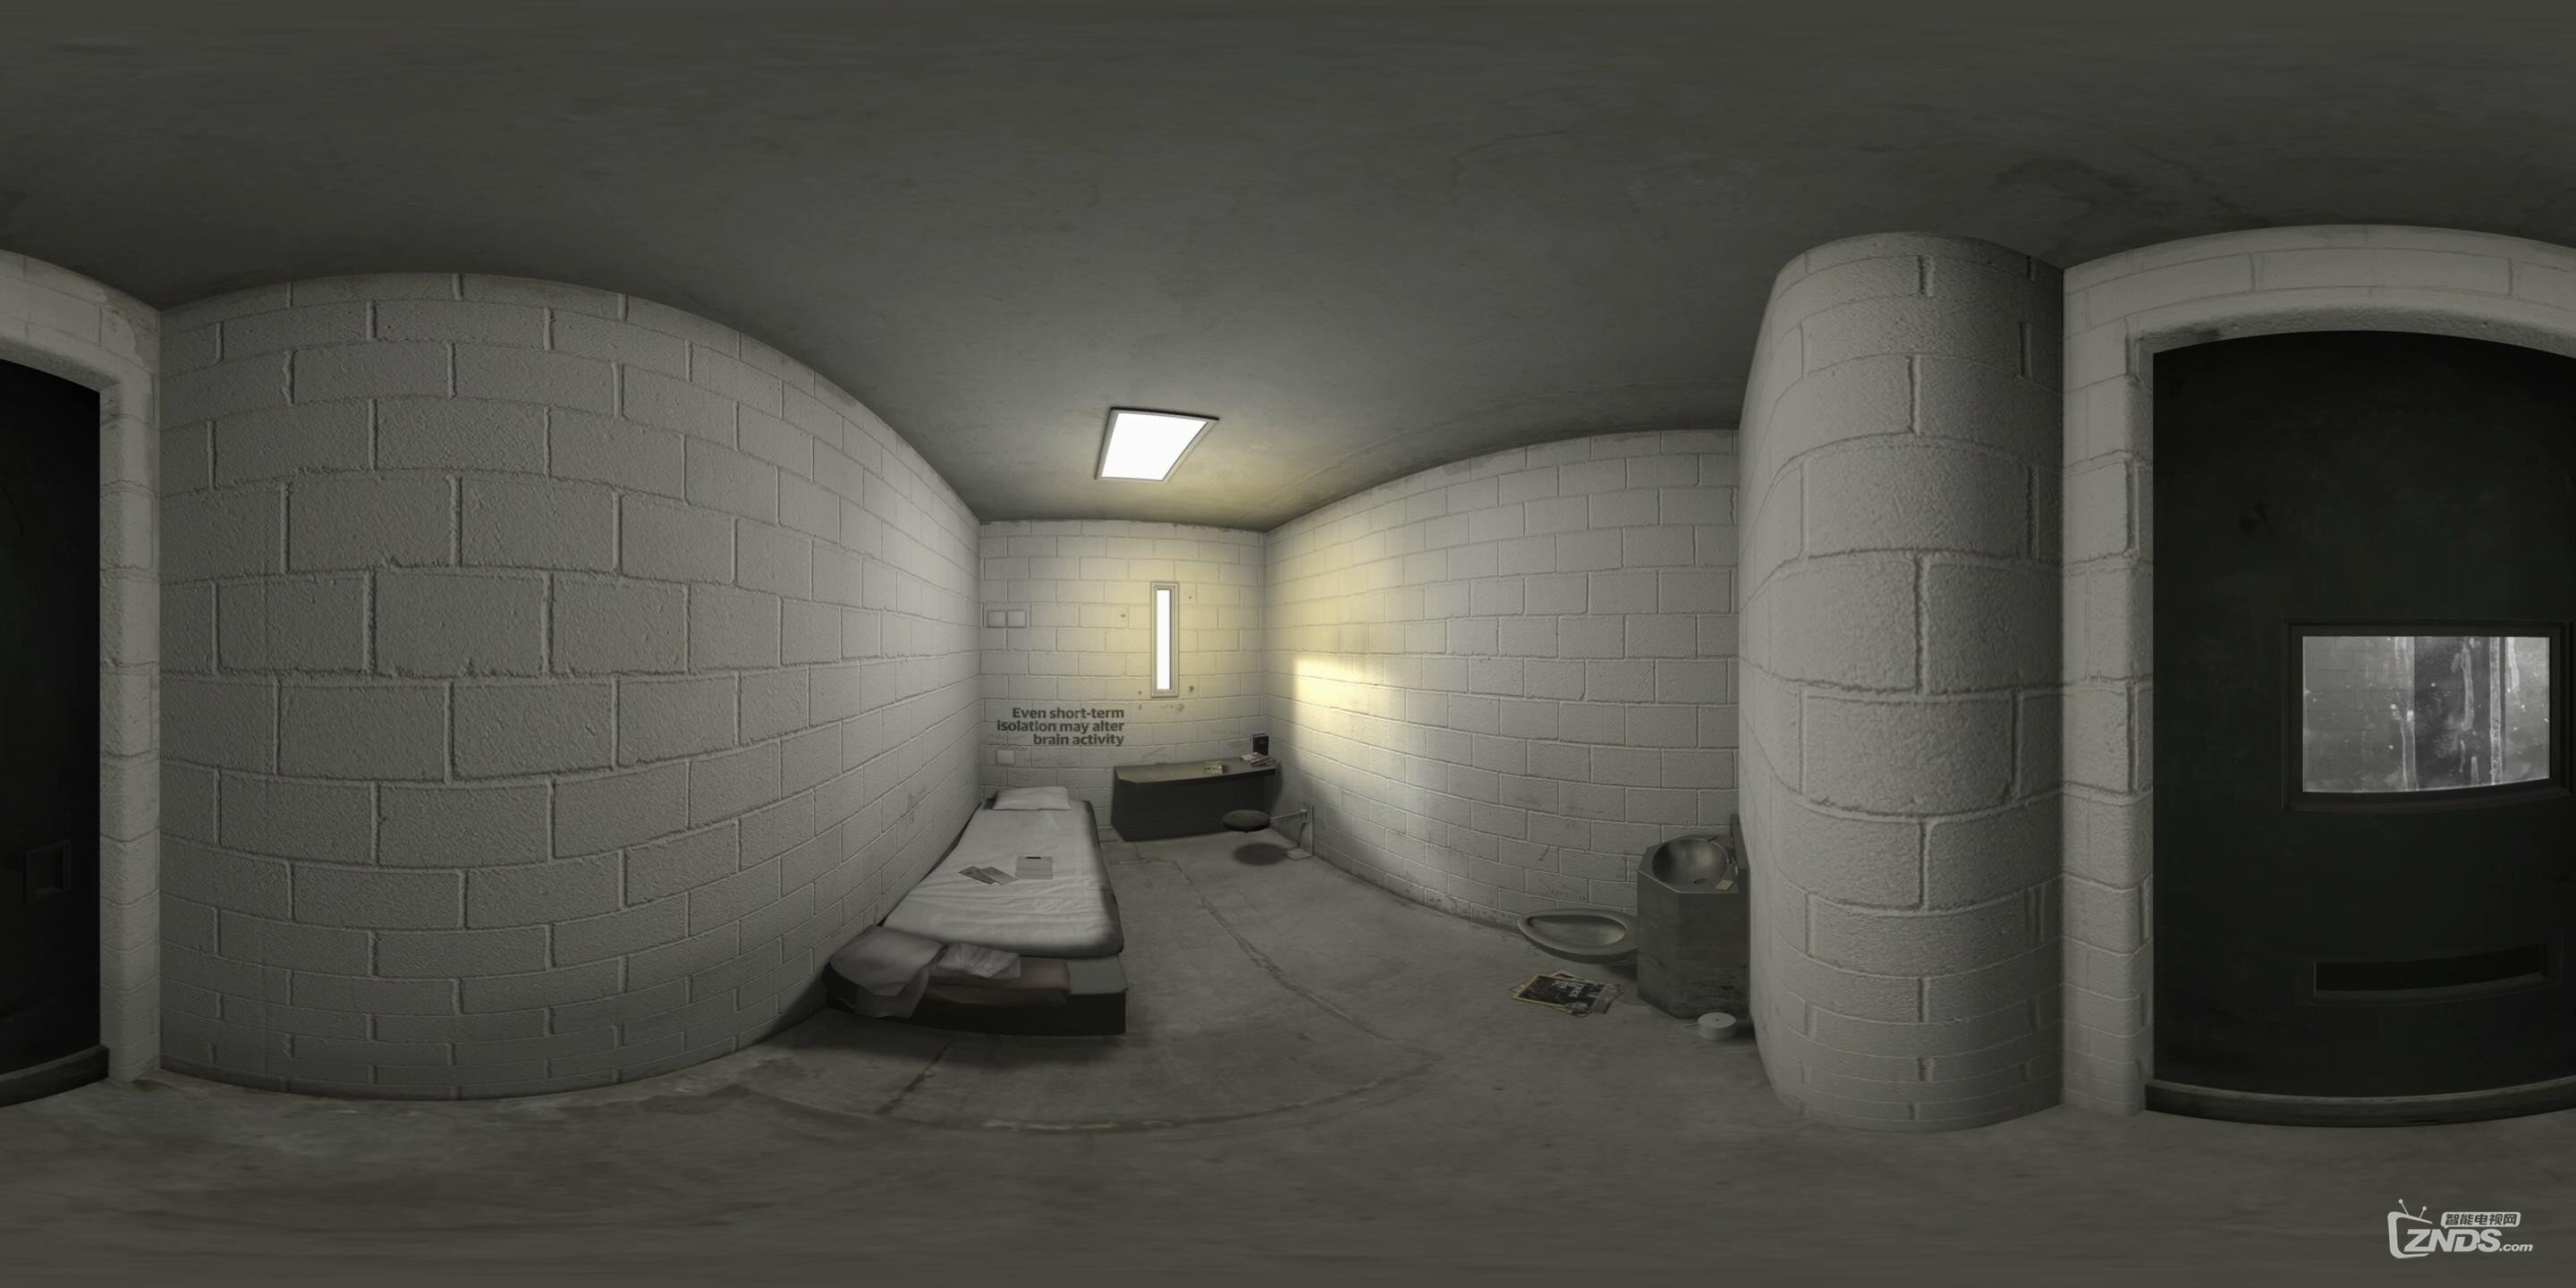 6x9__a_virtual_experience_of_solitary_confinement_–_360_video_2160P_20160922162937.JPG